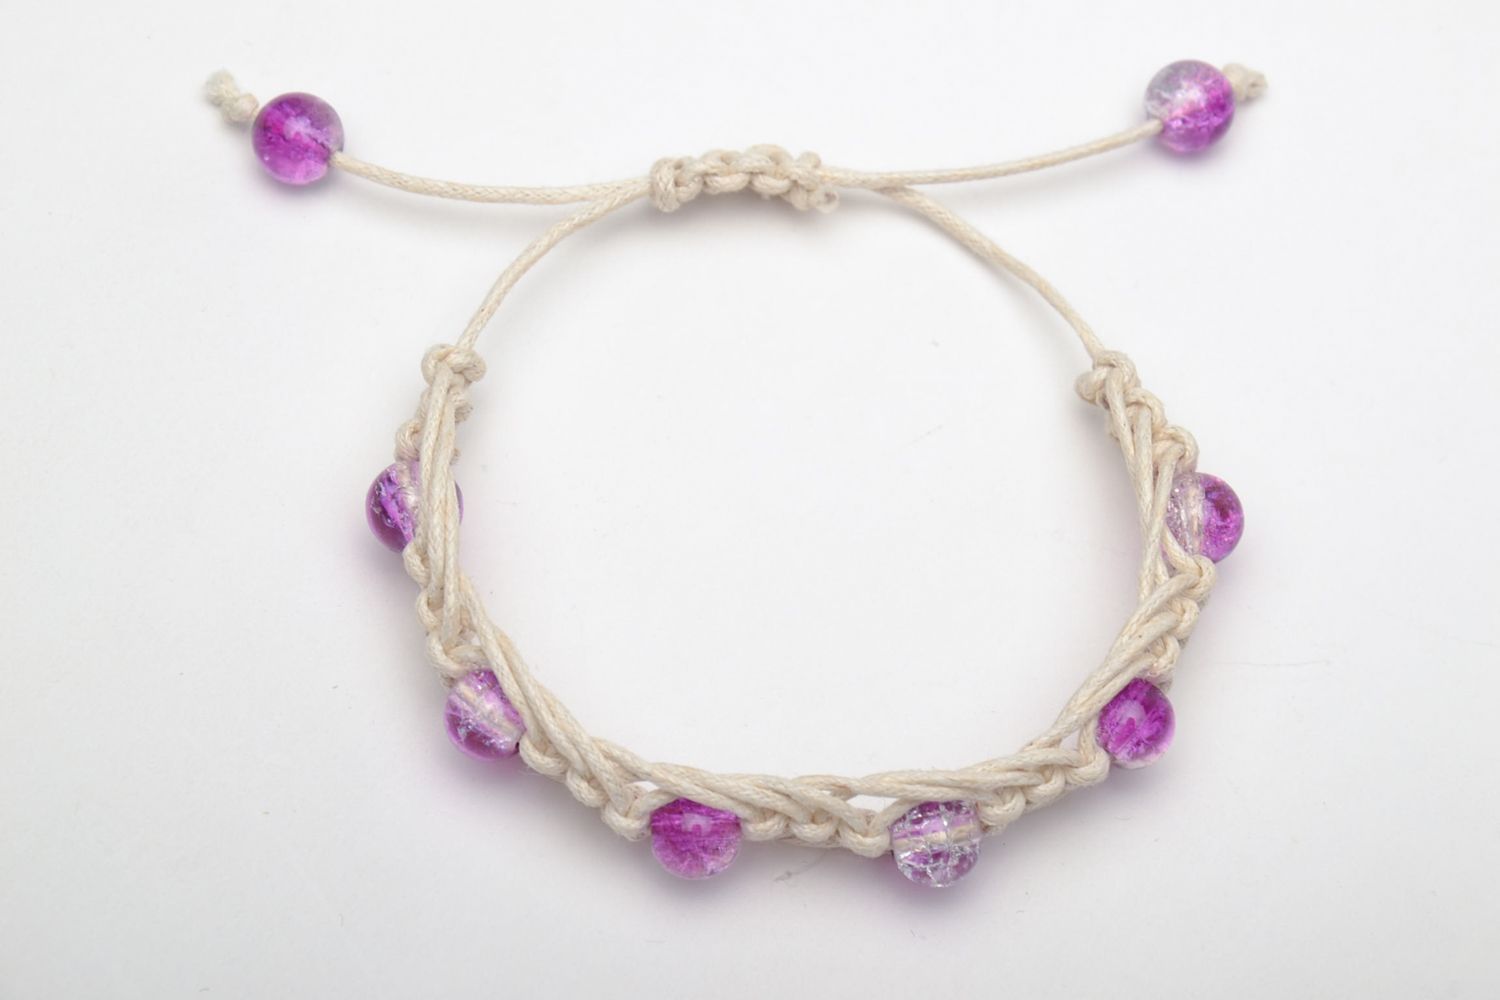 Friendship bracelet made of waxed cord and glass beads photo 3